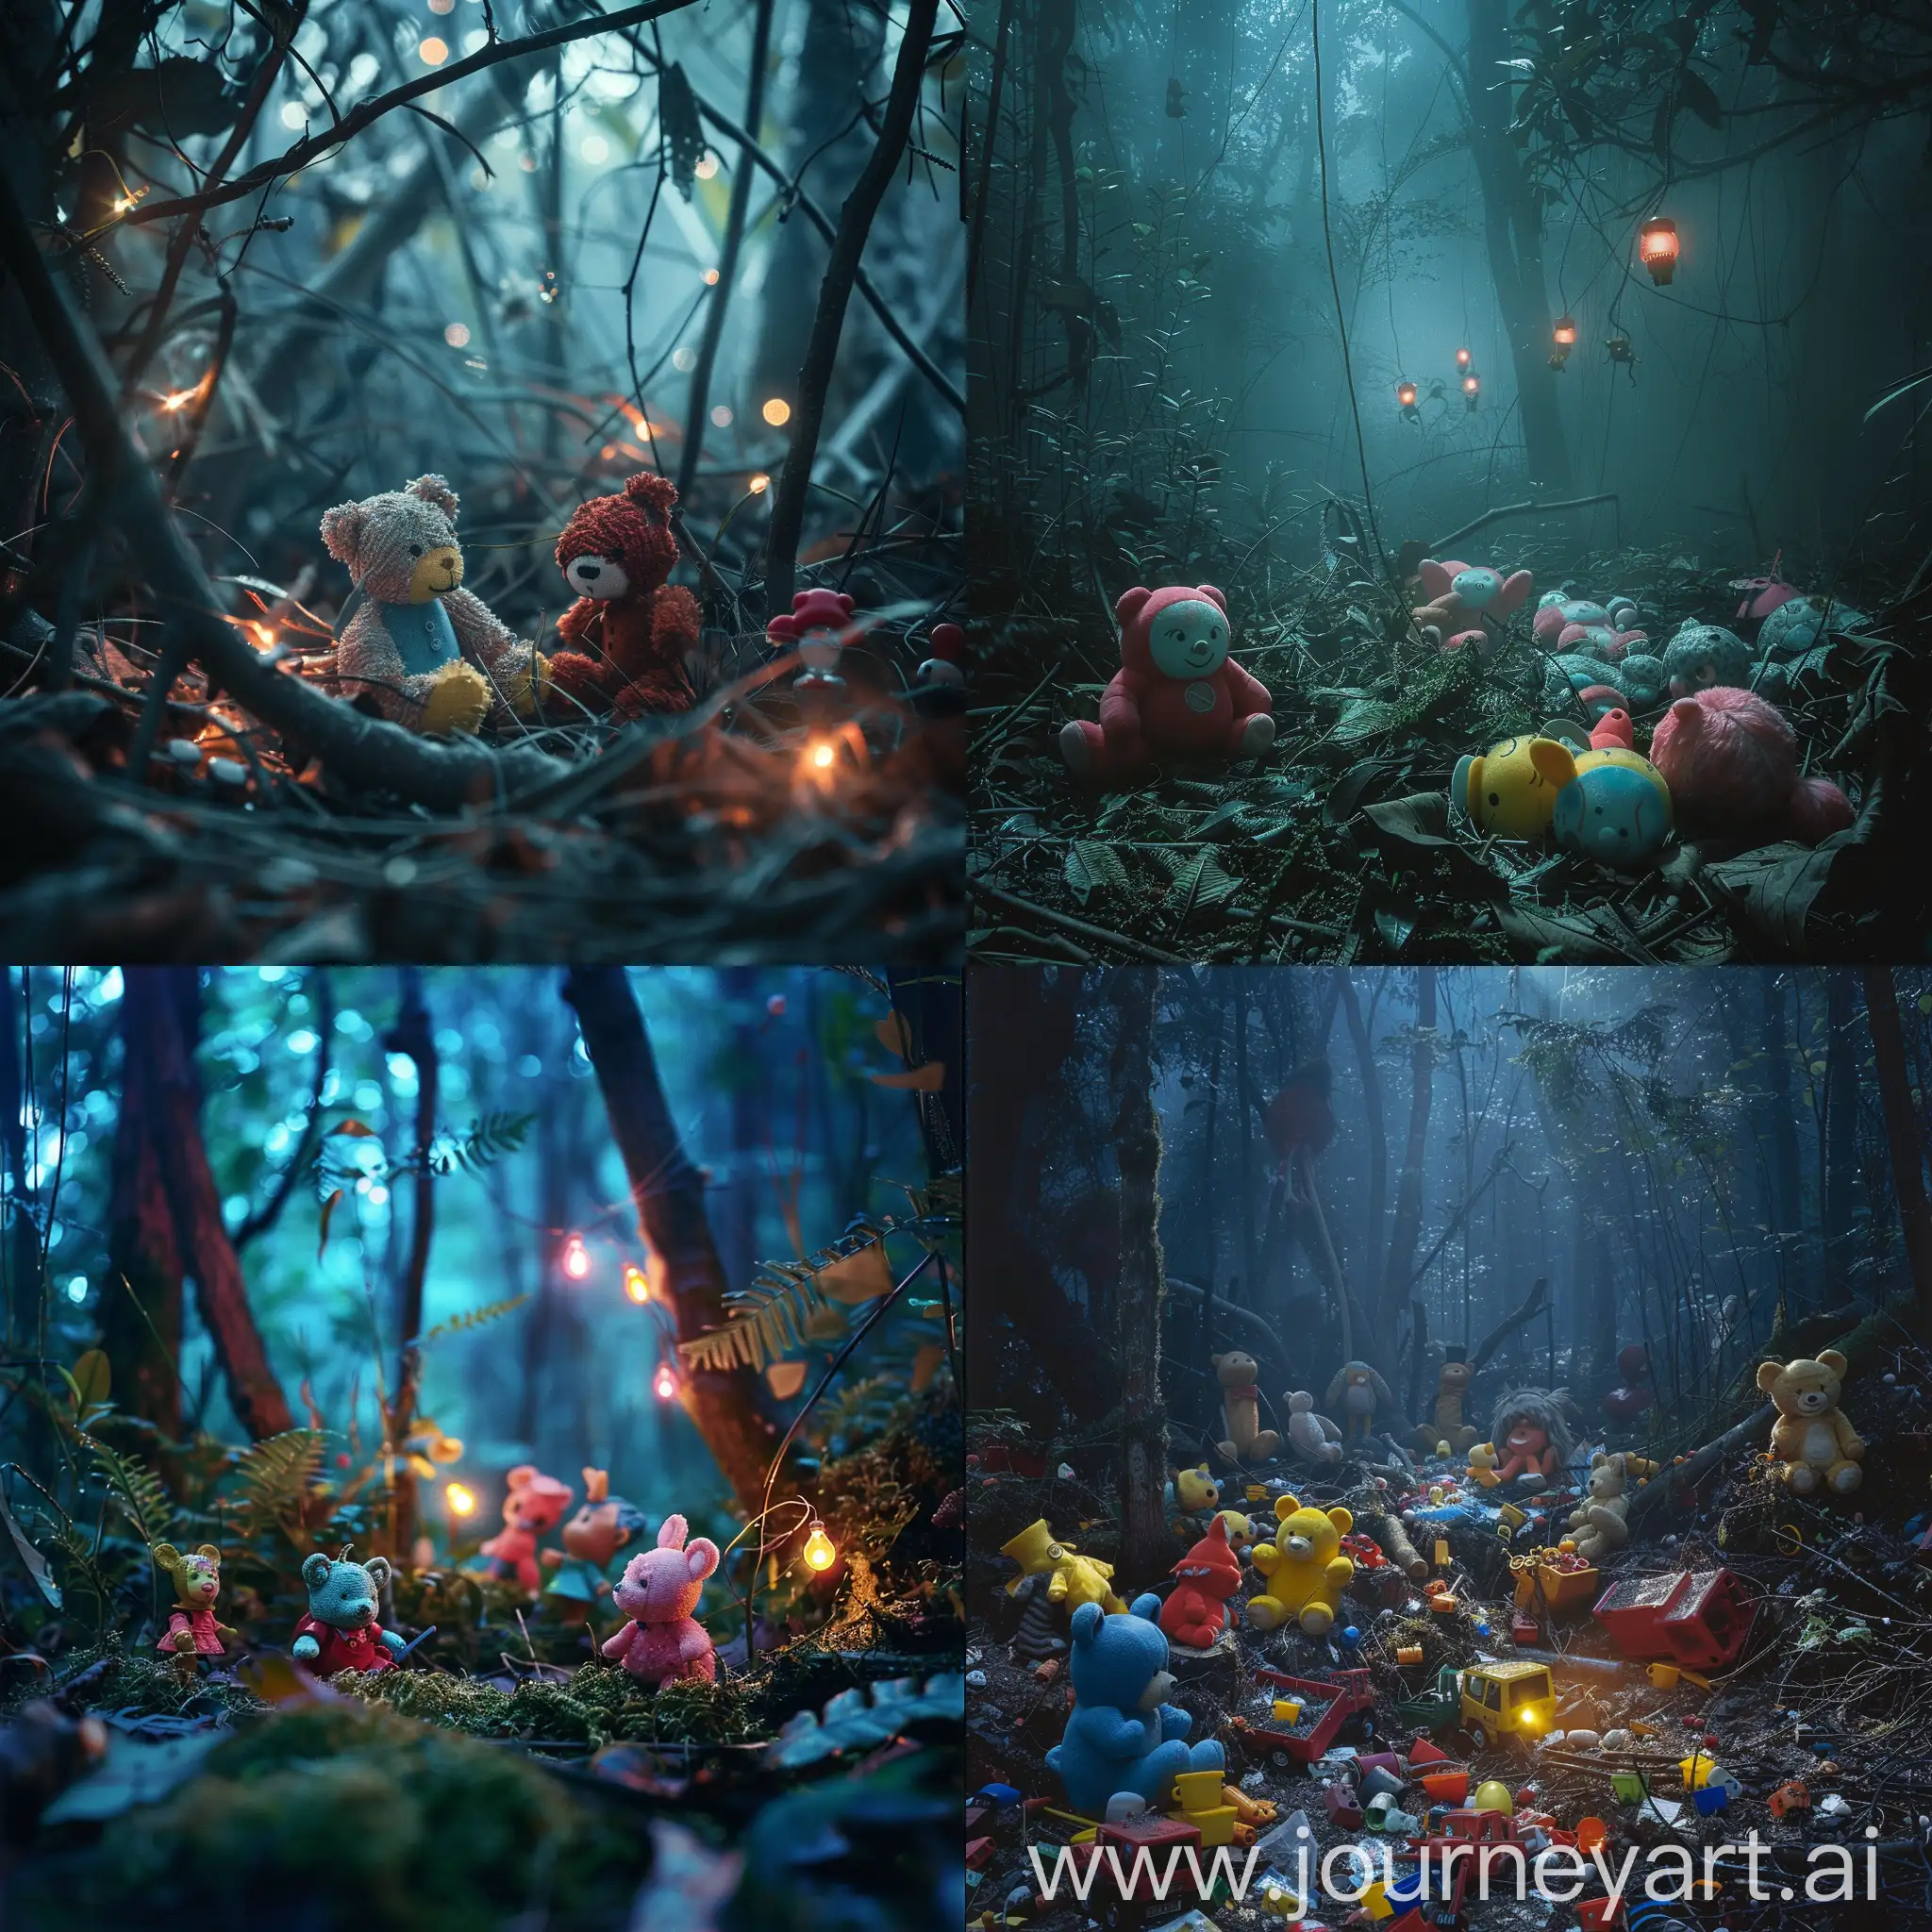 Abandoned-Toys-in-Enchanted-Forest-with-Surreal-Lights